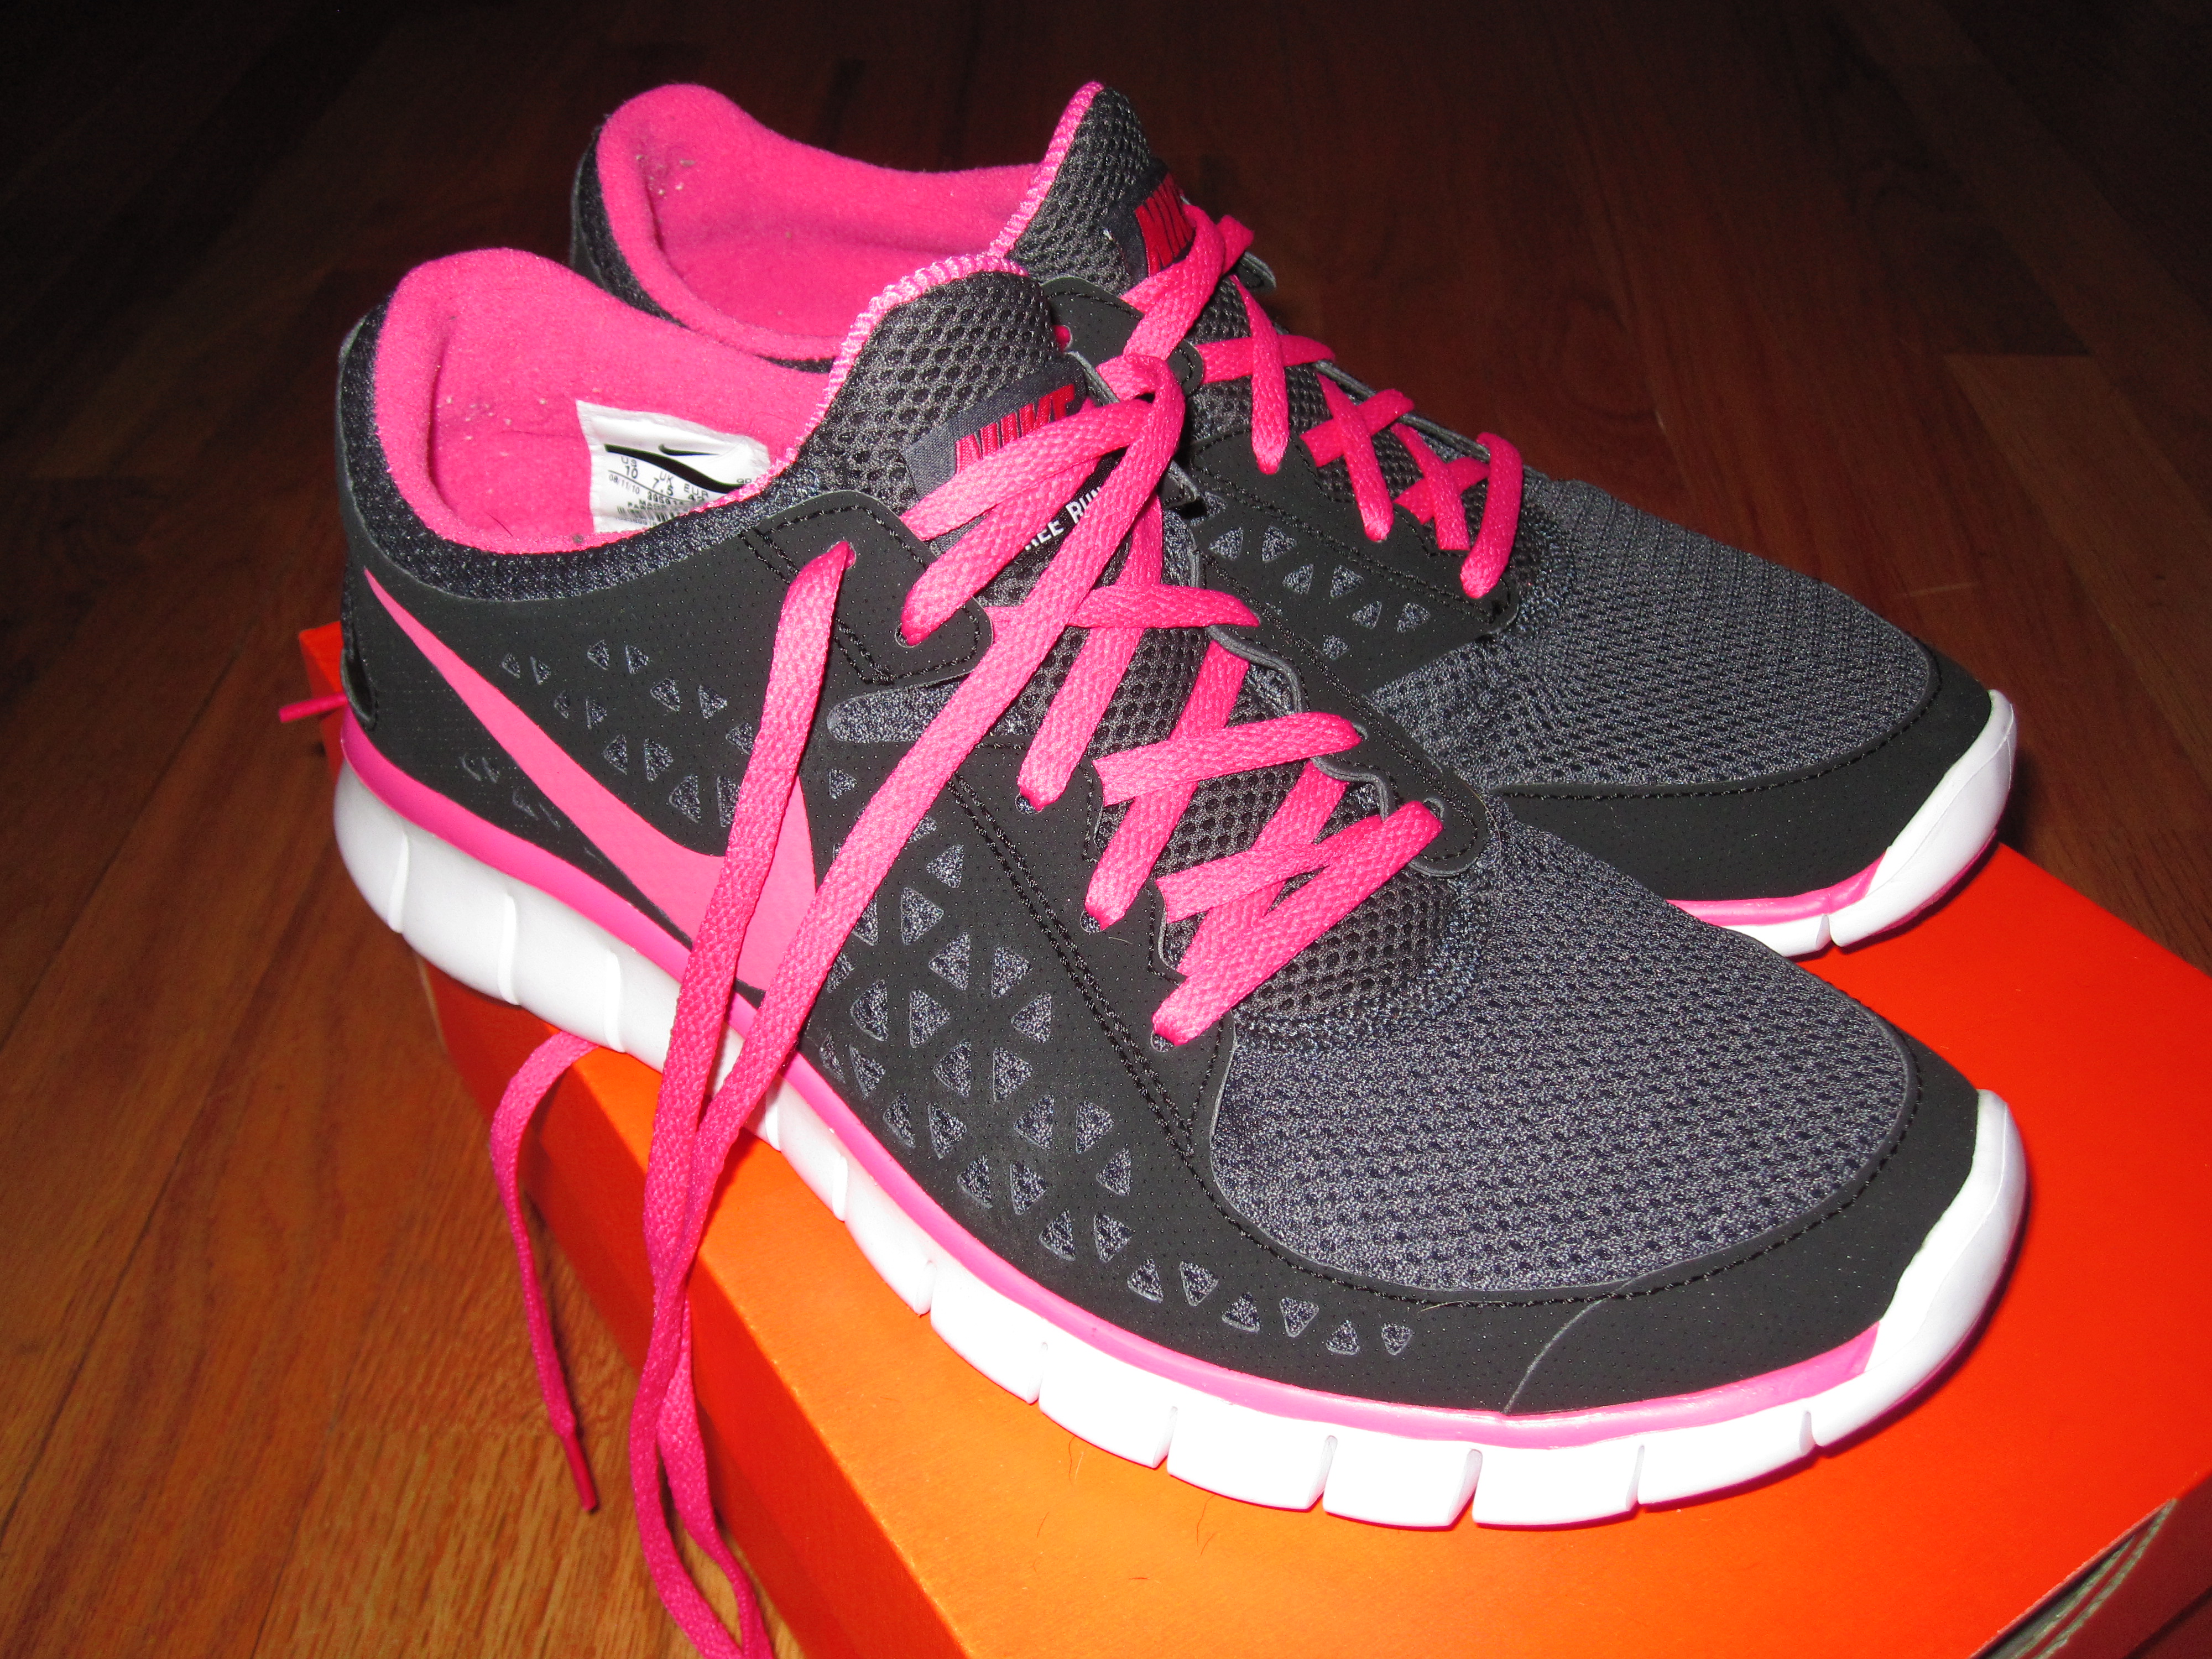 New Nike Free Running Shoes